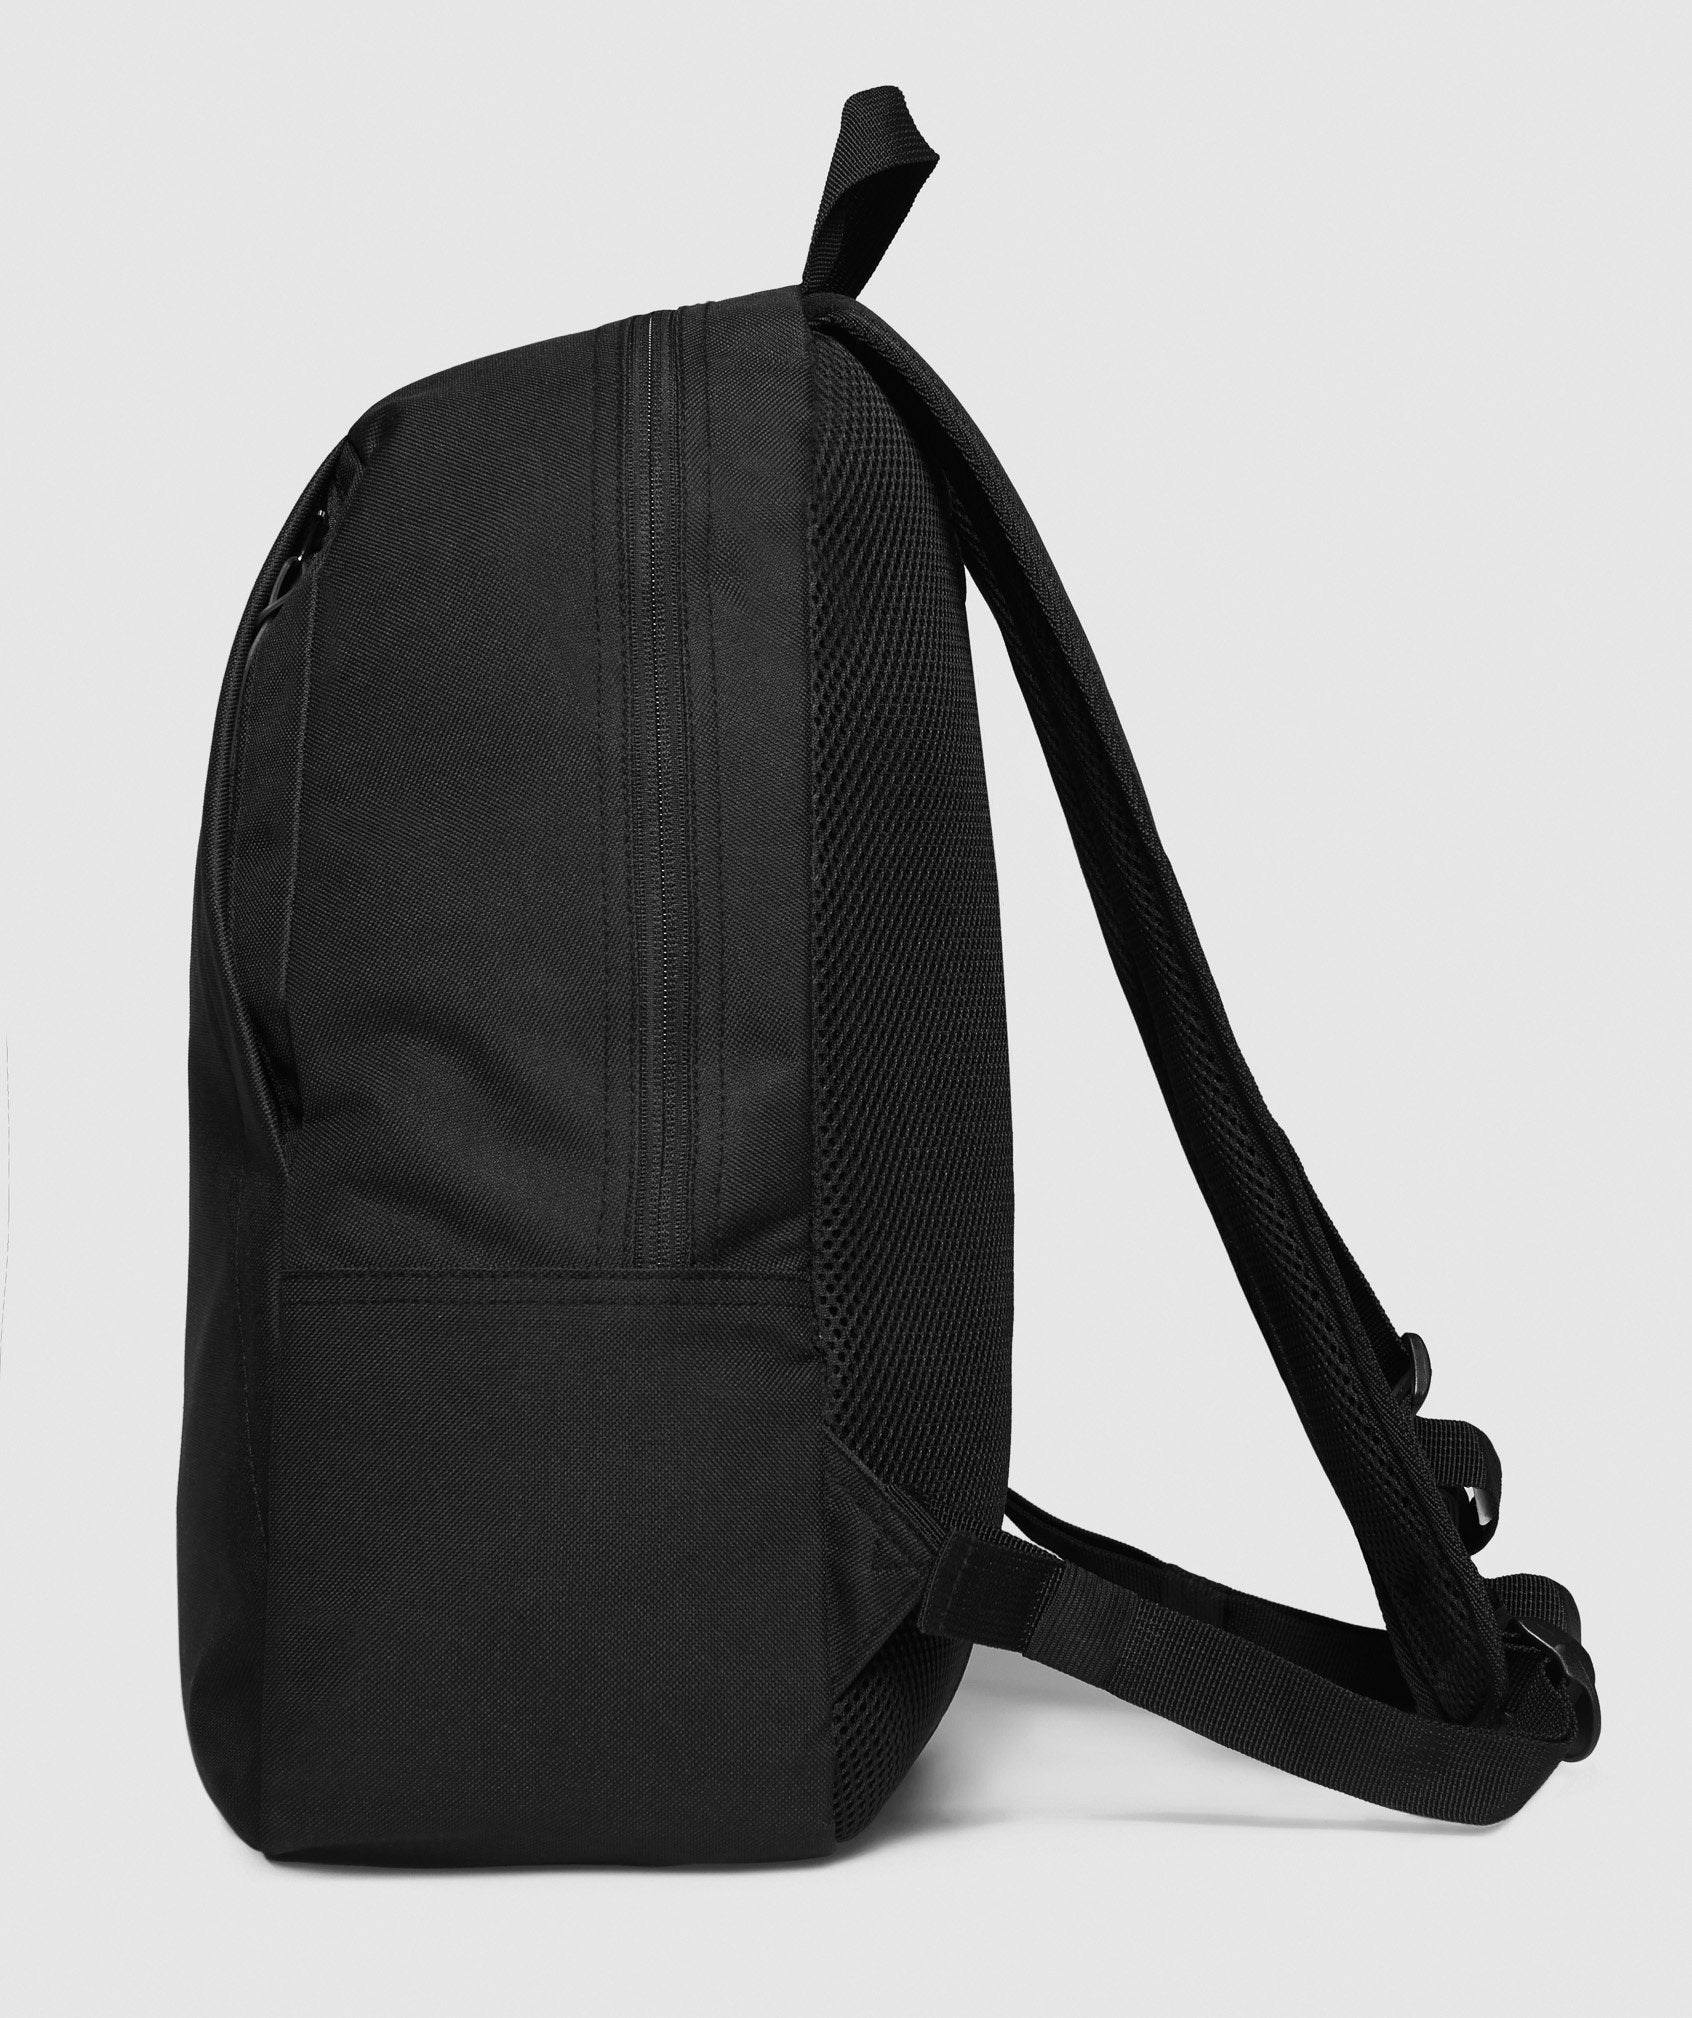 Academy Backpack in Black - view 3